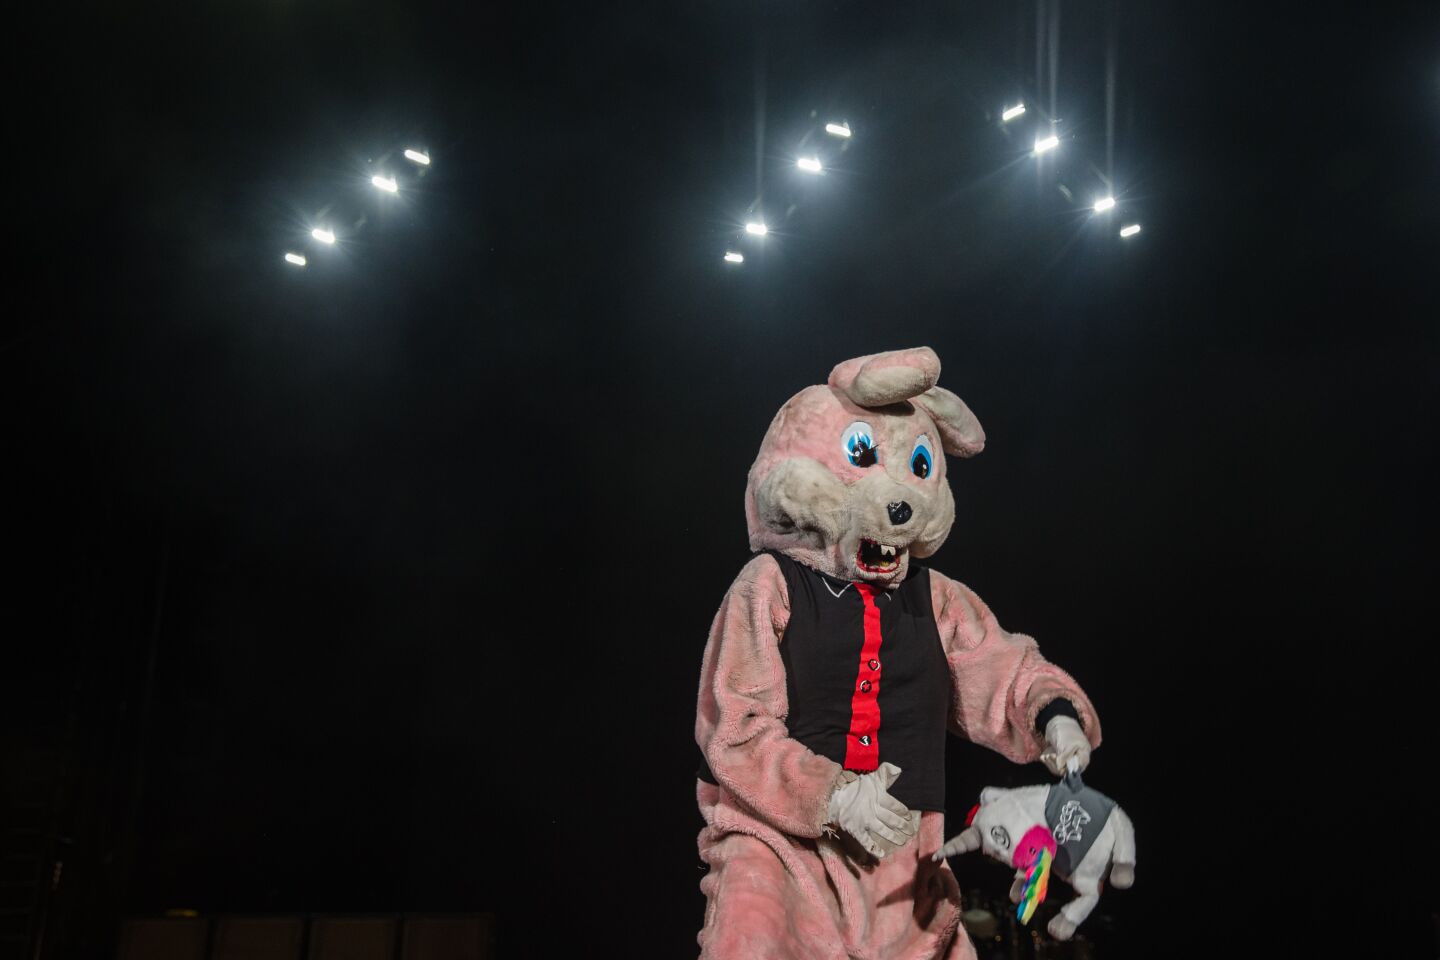 A pink bunny on stage before Green Day plays their set at the Hella Mega Tour at Petco Park in downtown San Diego on August 29, 2021.